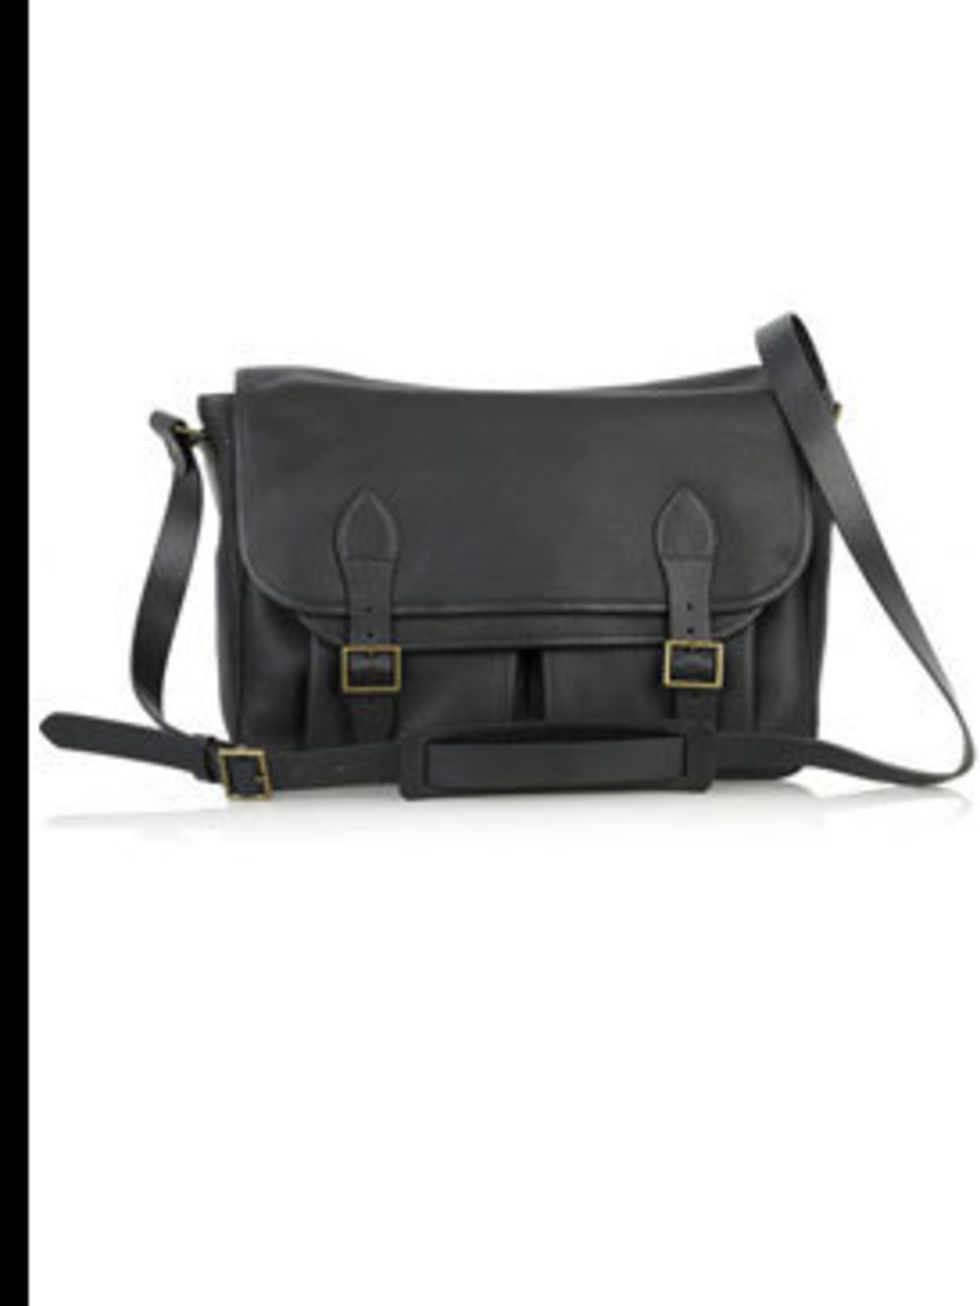 <p>Leather satchel, £285, by APC at <a href="http://www.net-a-porter.com/product/46205">Net-a-Porter</a></p>